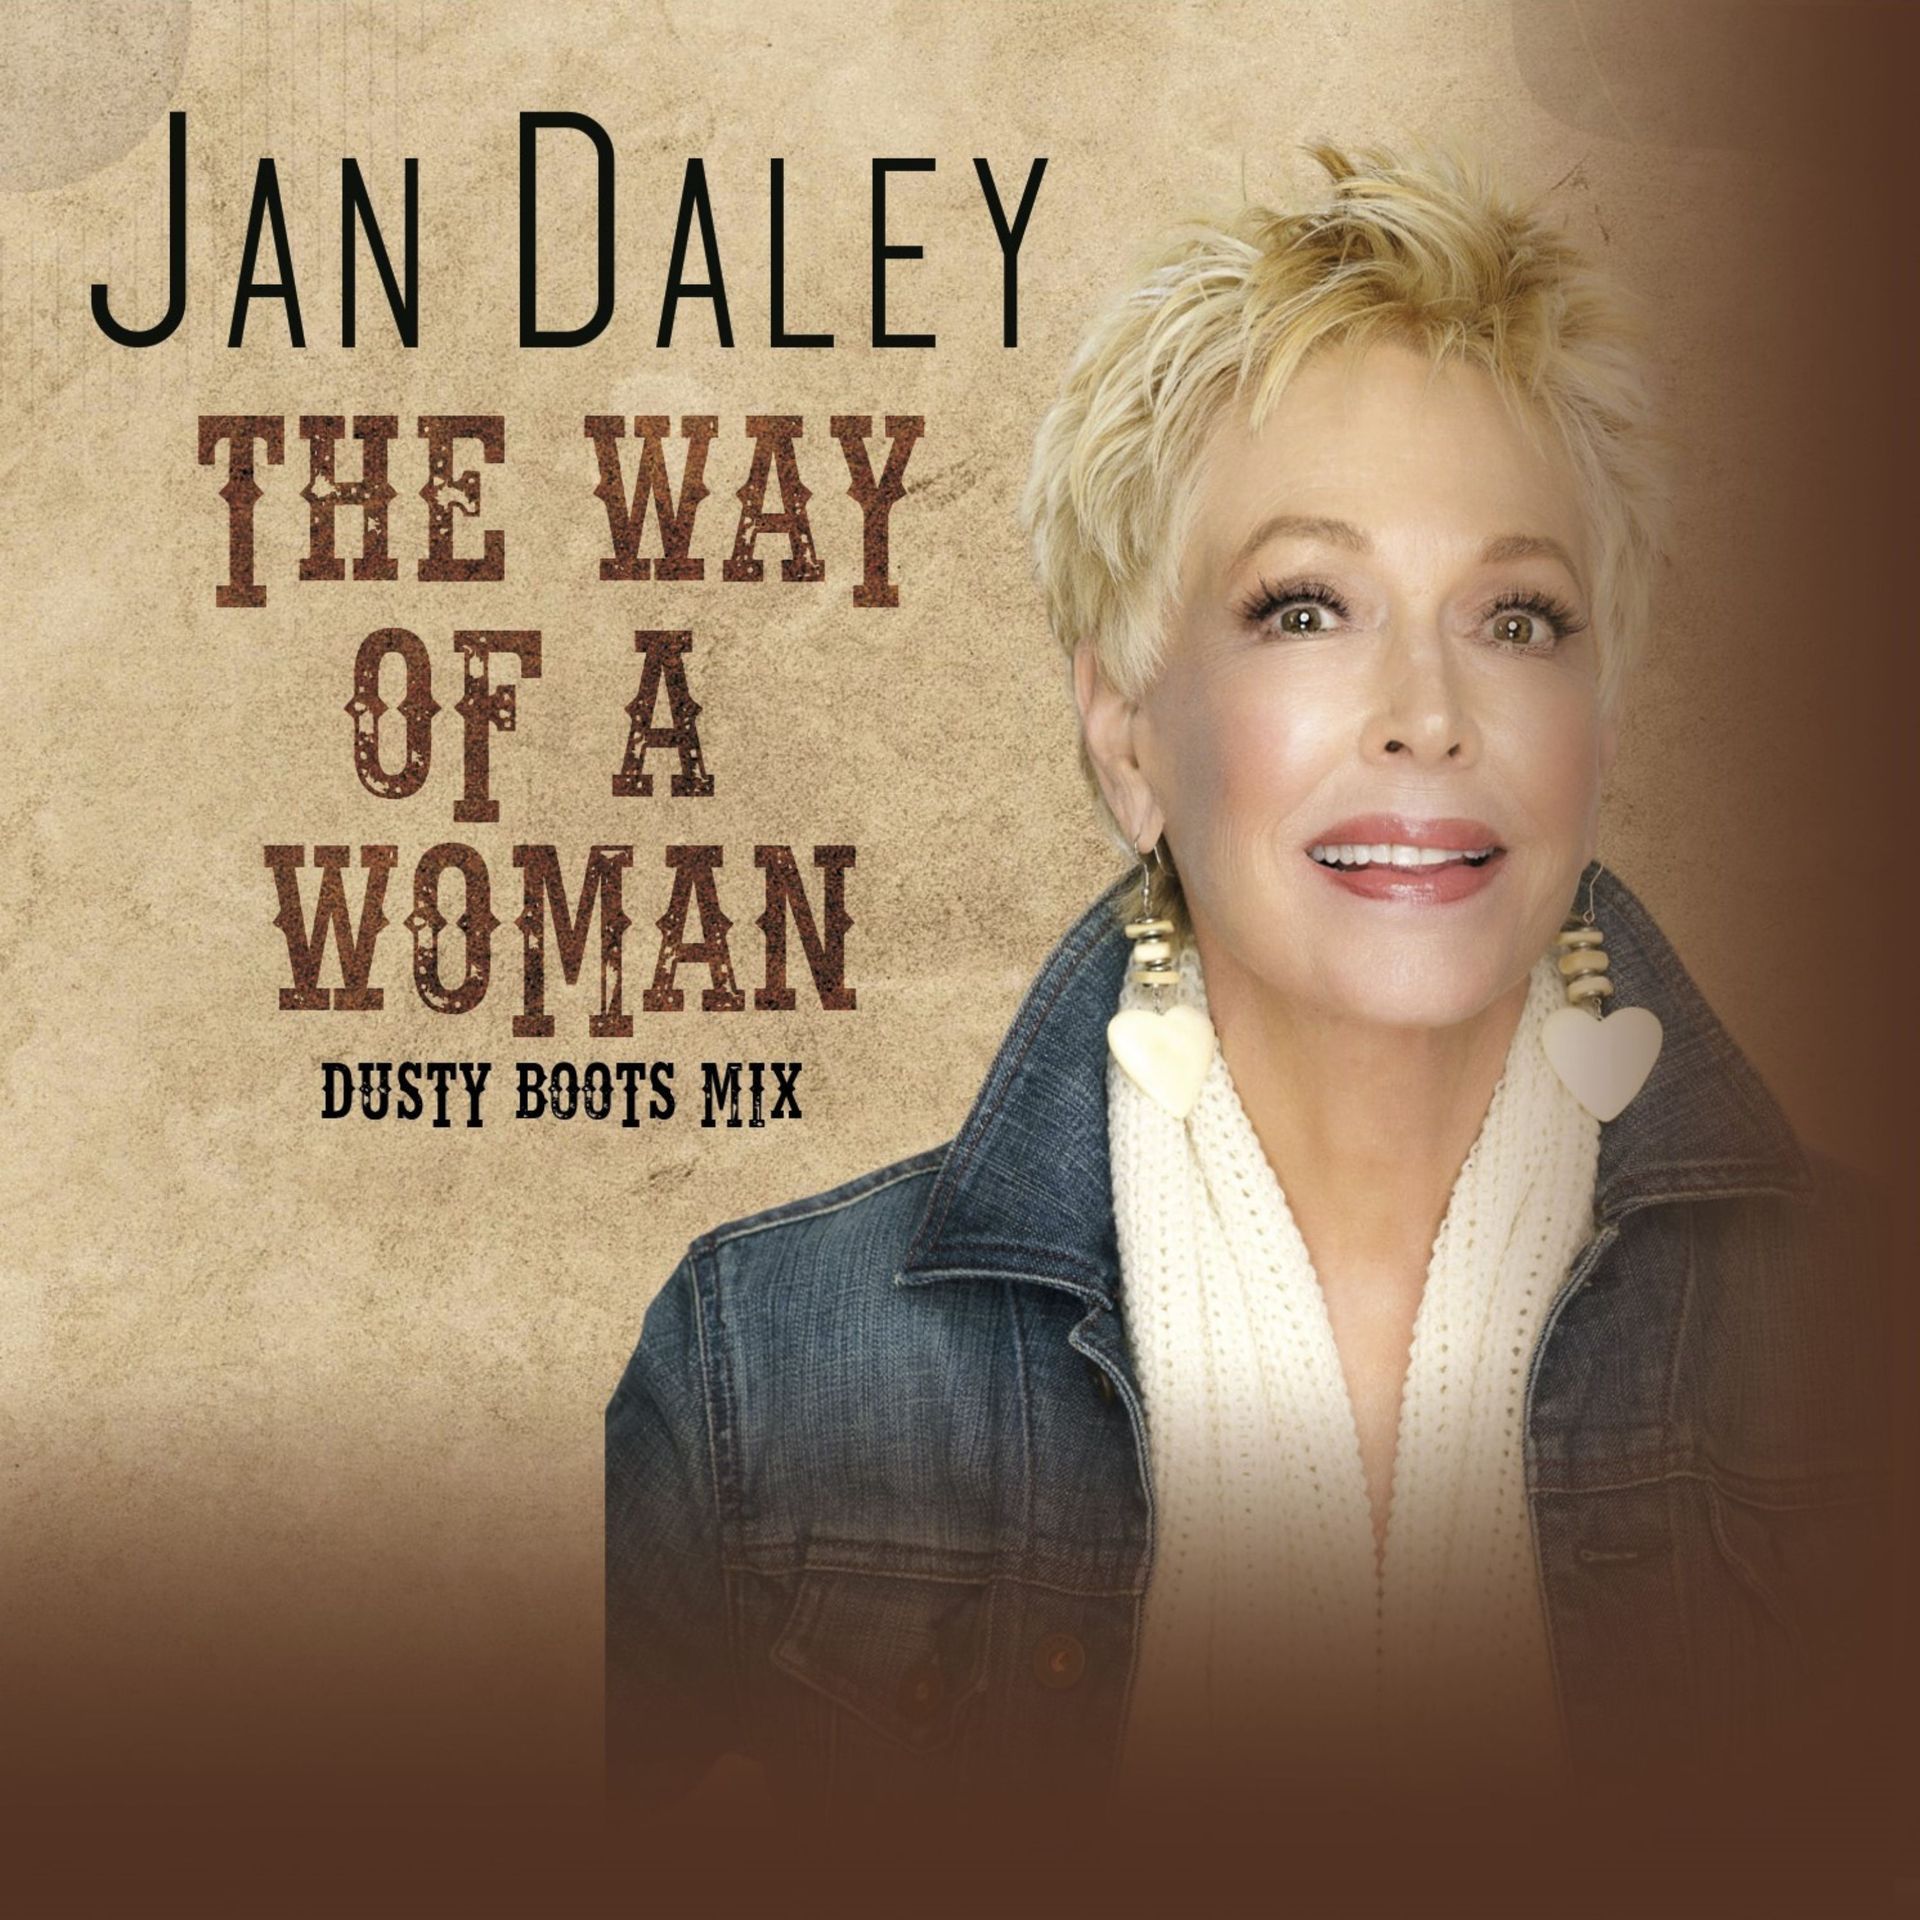 A woman is on the cover of a jan daley album